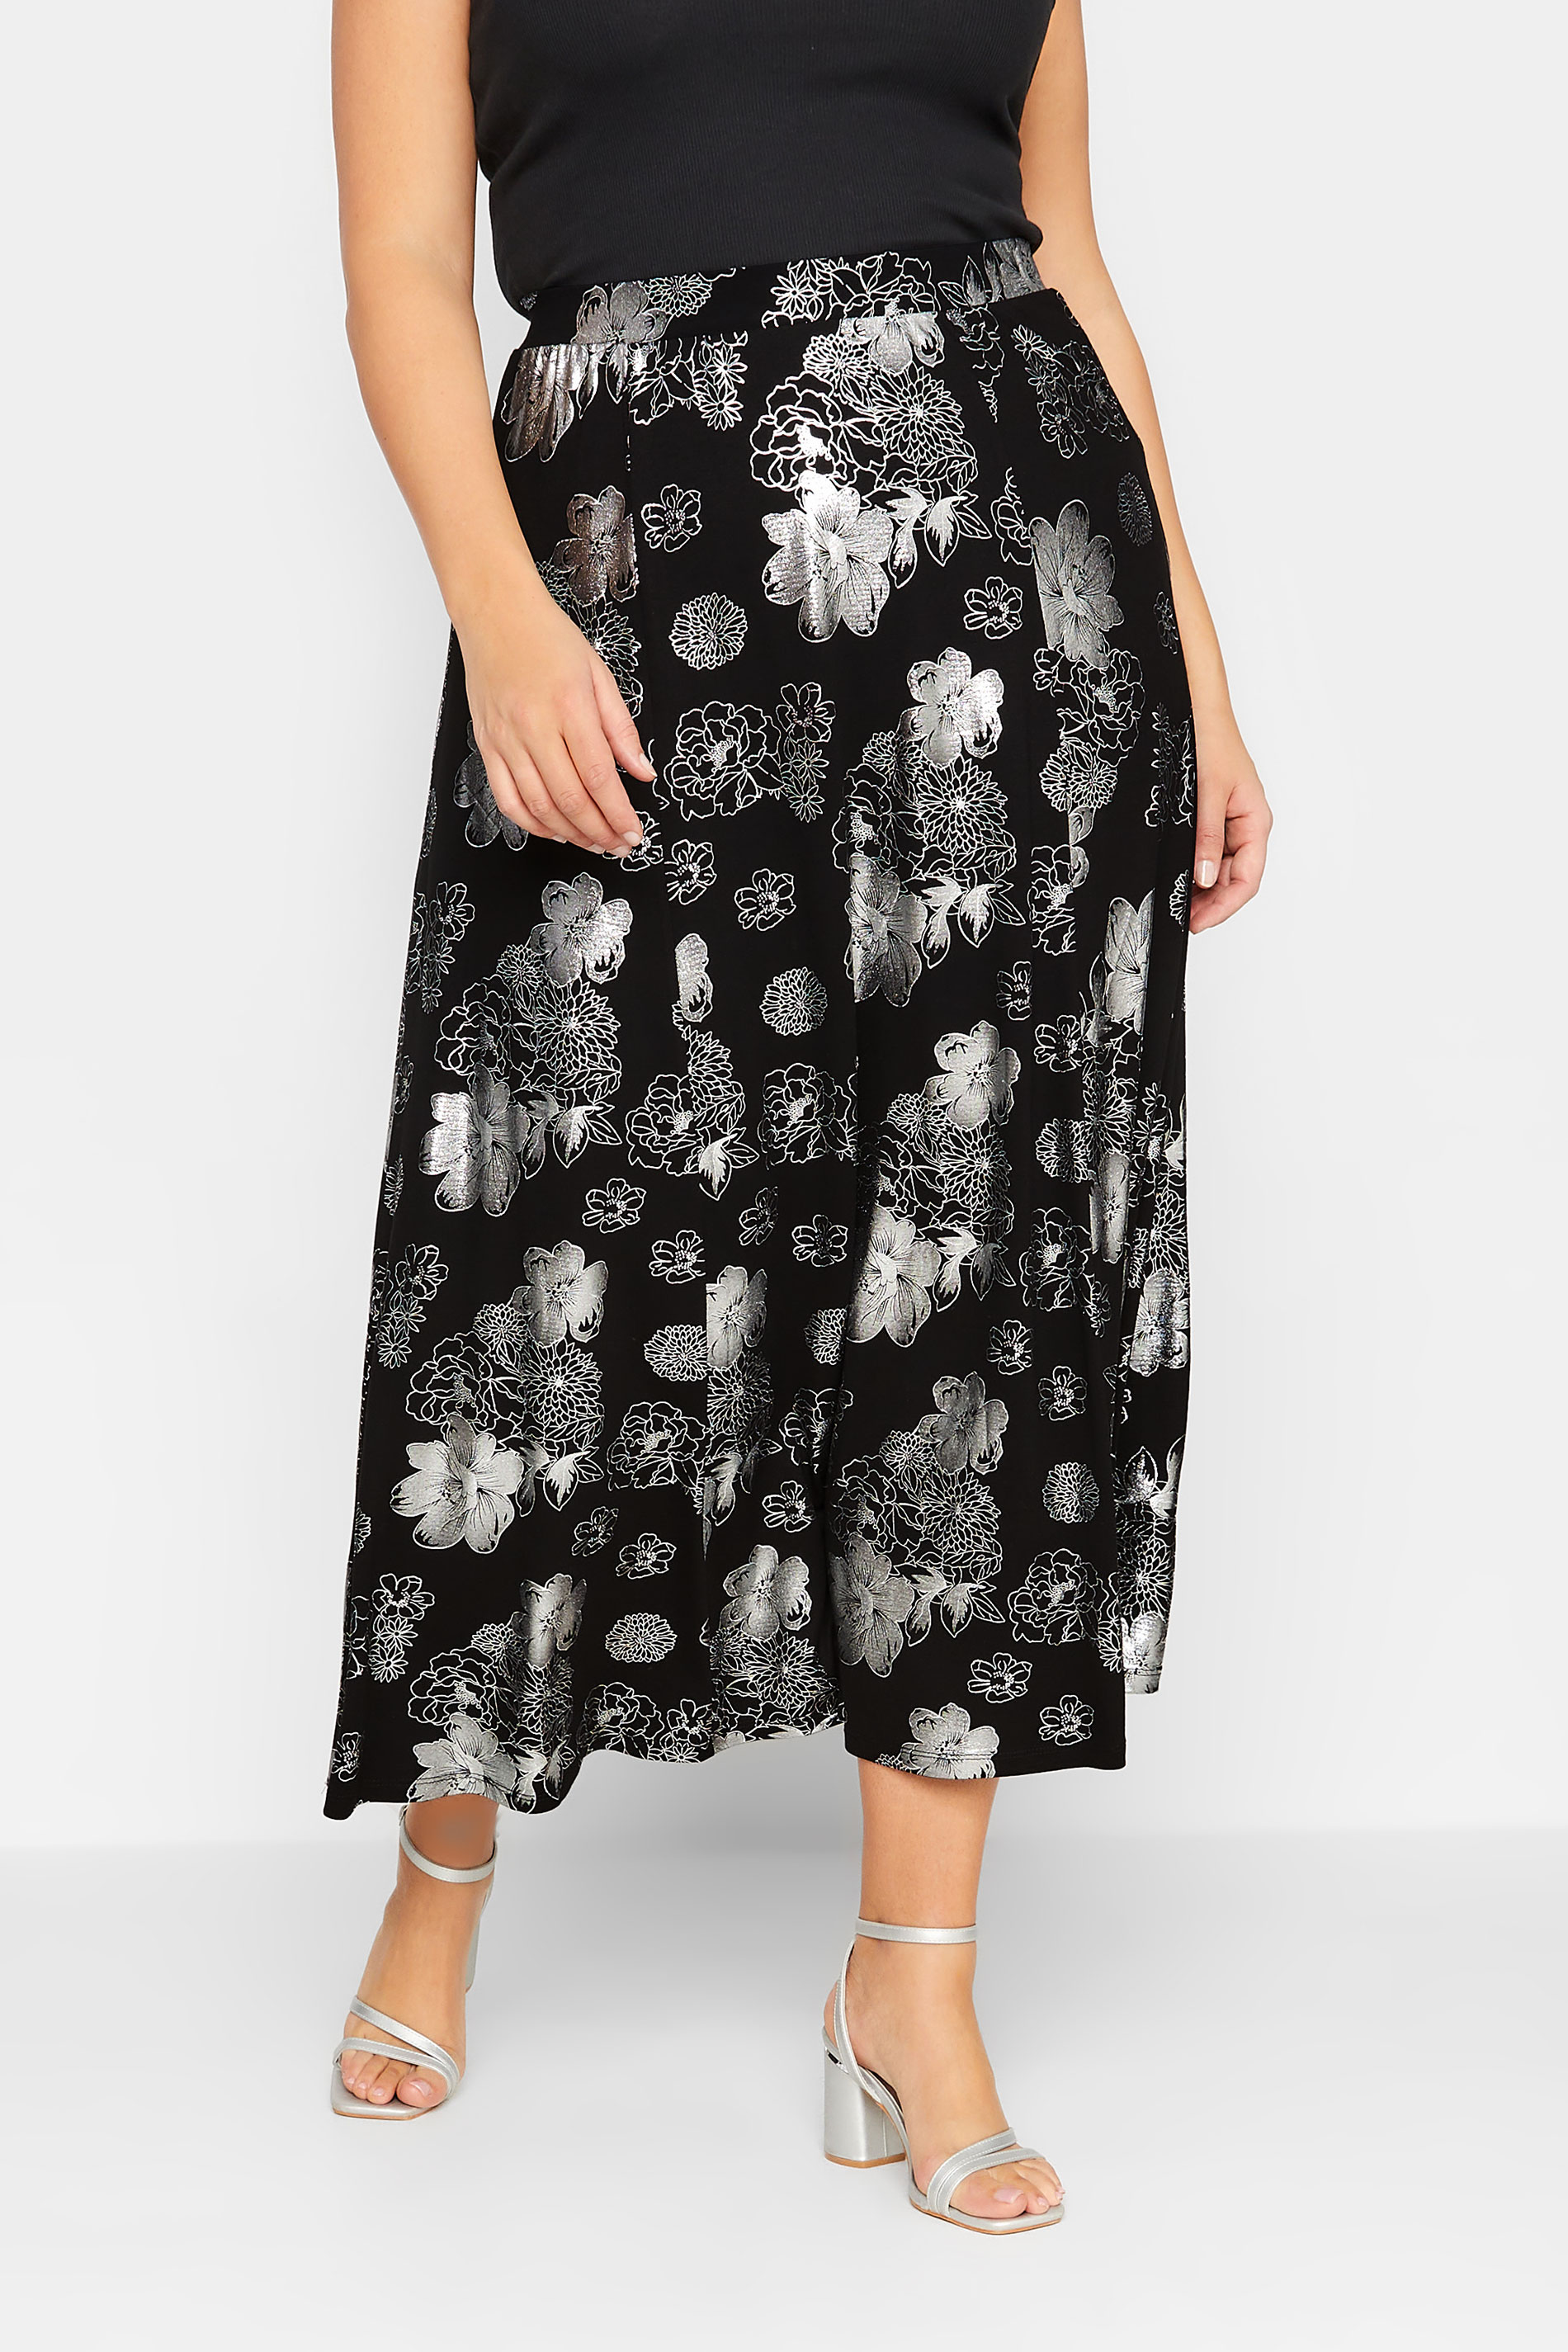 YOURS LUXURY Plus Size Black & Silver Floral Foil Printed Skirt | Yours Clothing 1